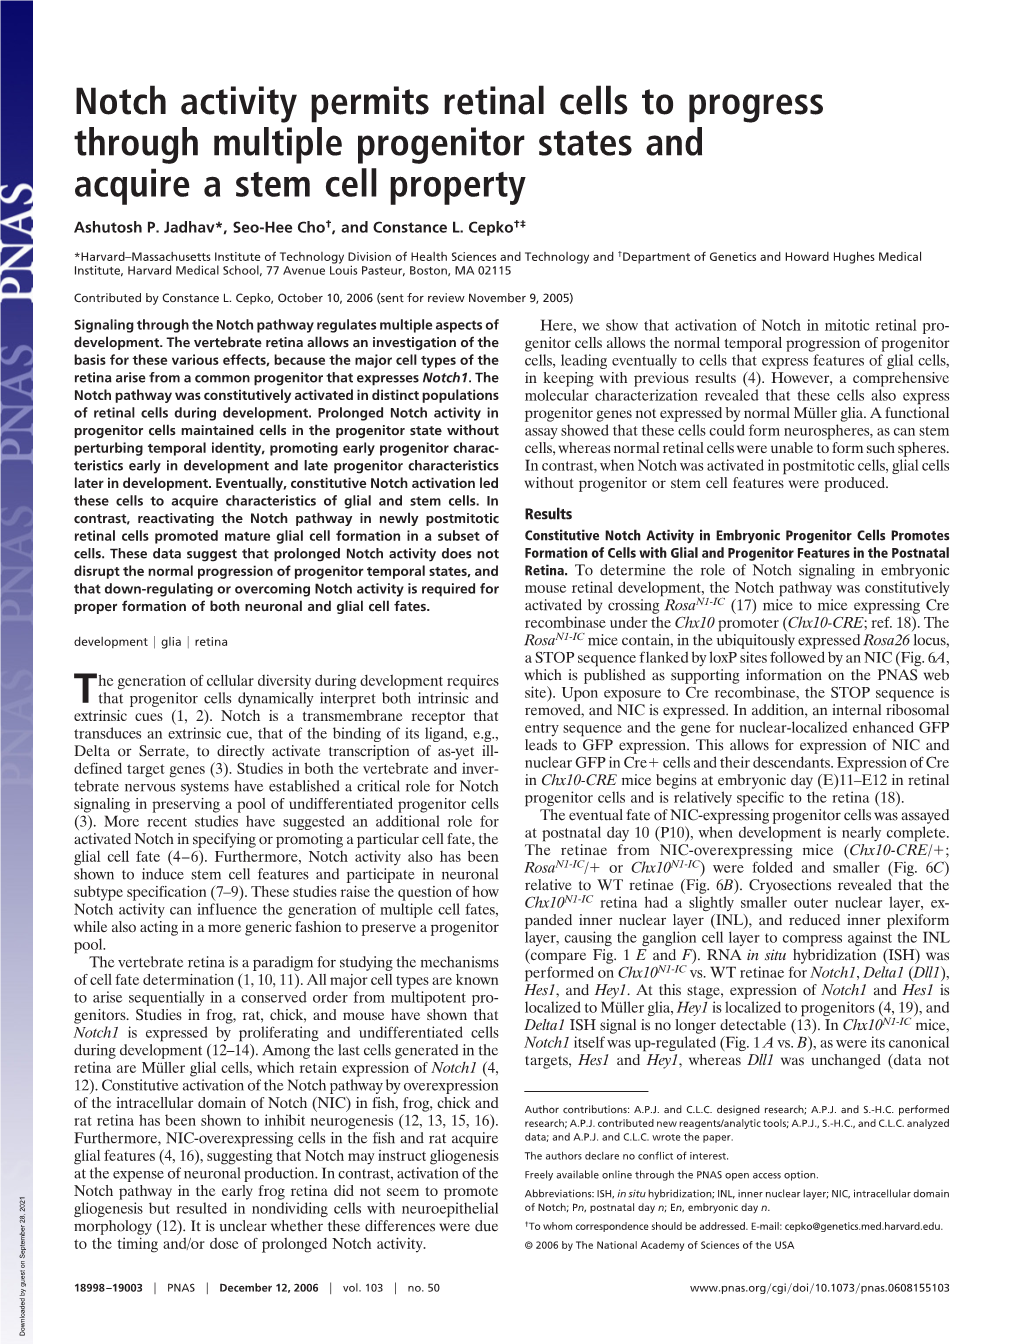 Notch Activity Permits Retinal Cells to Progress Through Multiple Progenitor States and Acquire a Stem Cell Property